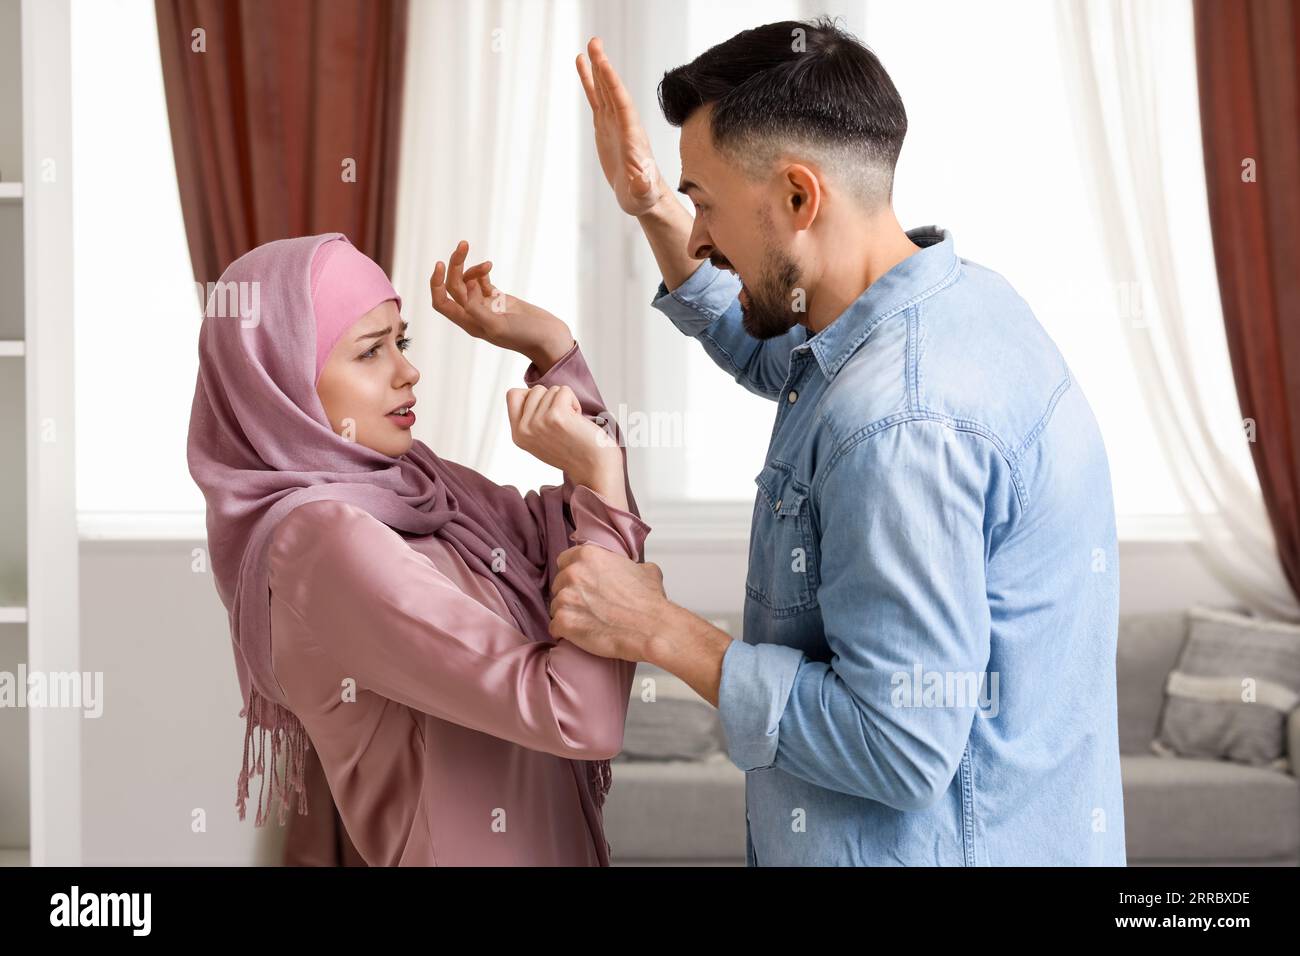 Angry Muslim man threatening his wife at home. Domestic violence concept  Stock Photo - Alamy